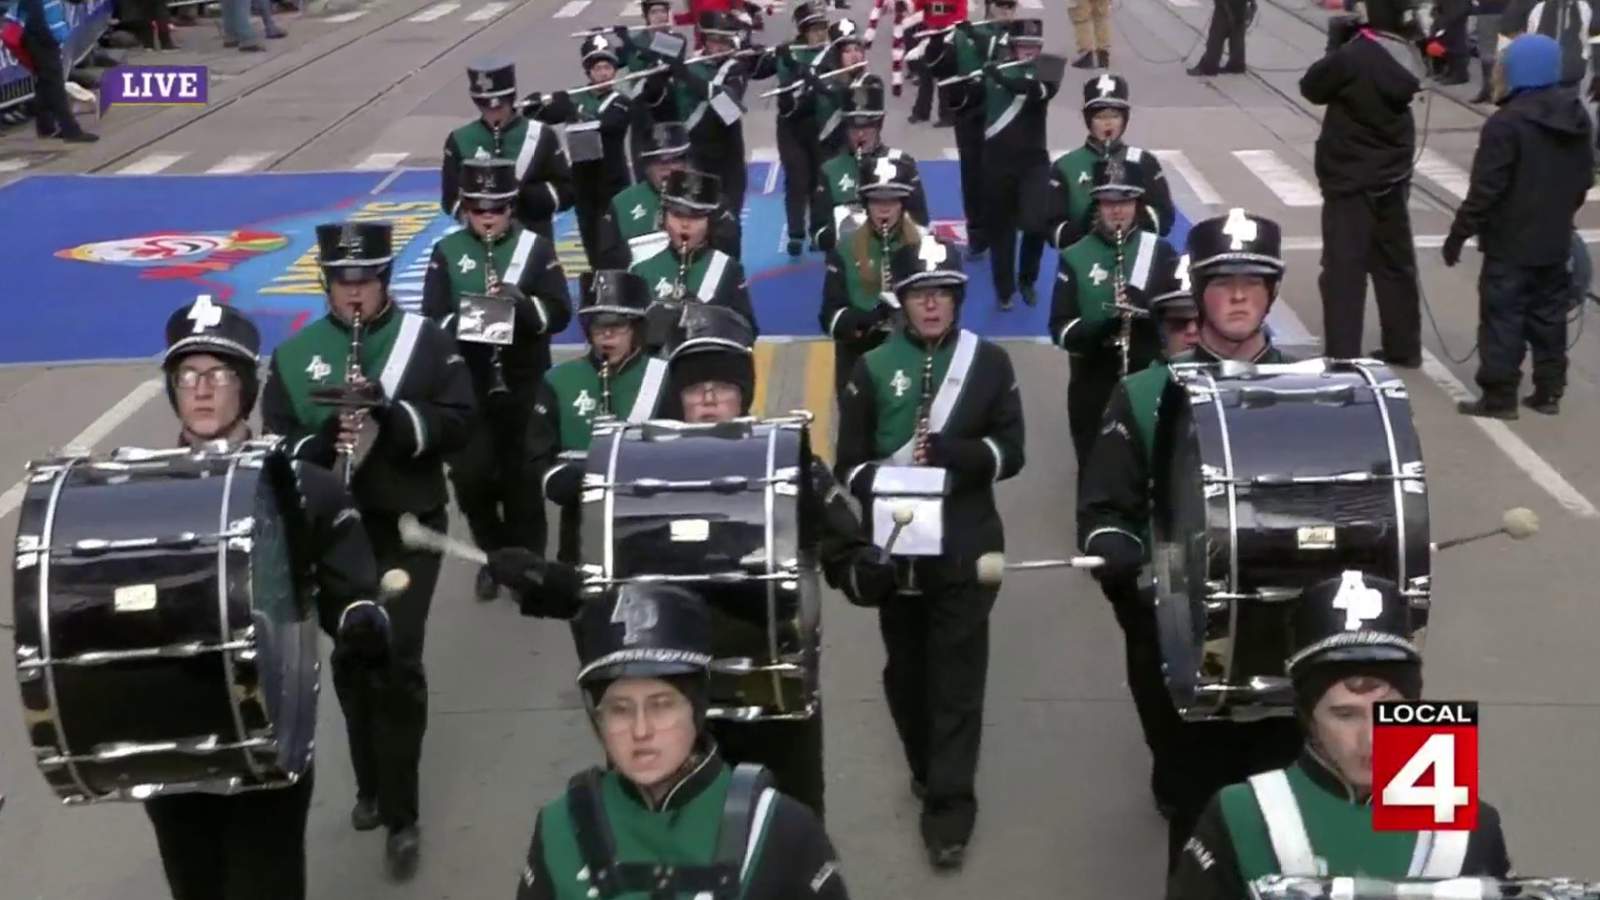 Allen Park Marching Band performs at 2019 America's Thanksgiving Parade in Detroit